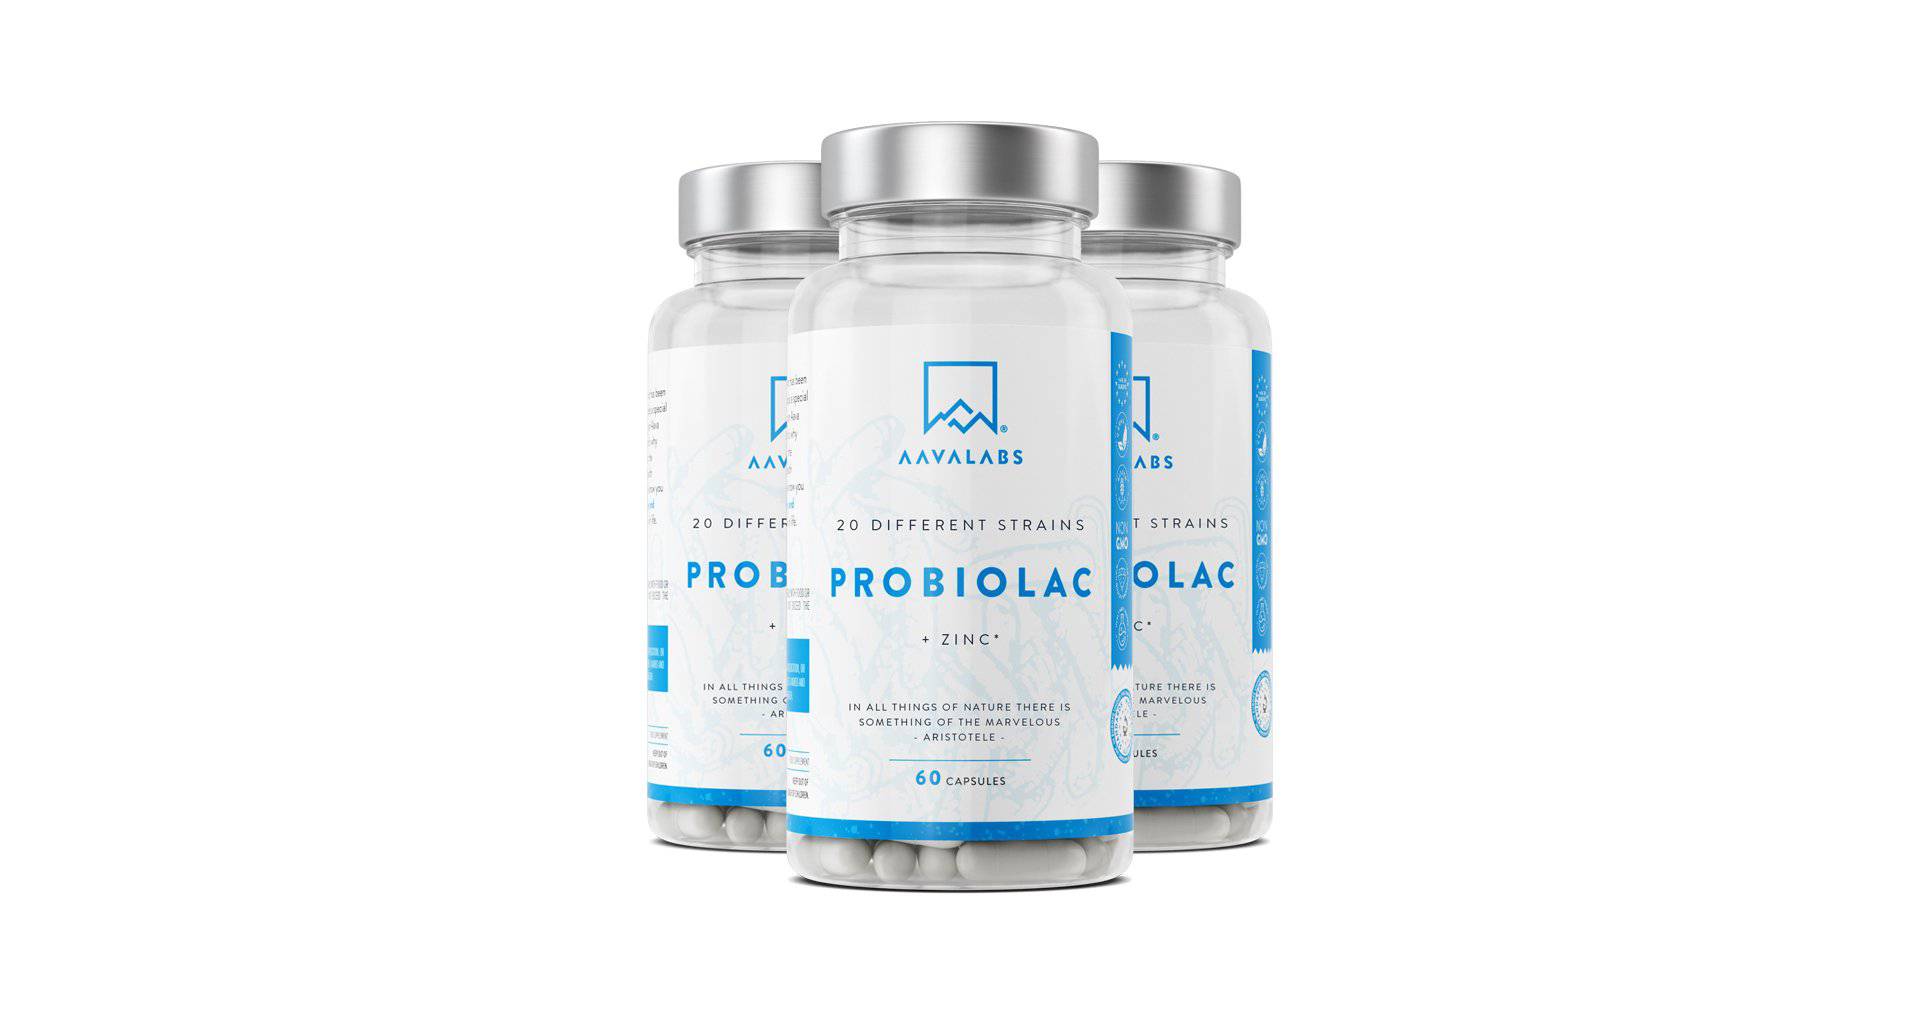 Probiolac Probiotic - 6 Month Pack nutritional information - AAVALABS